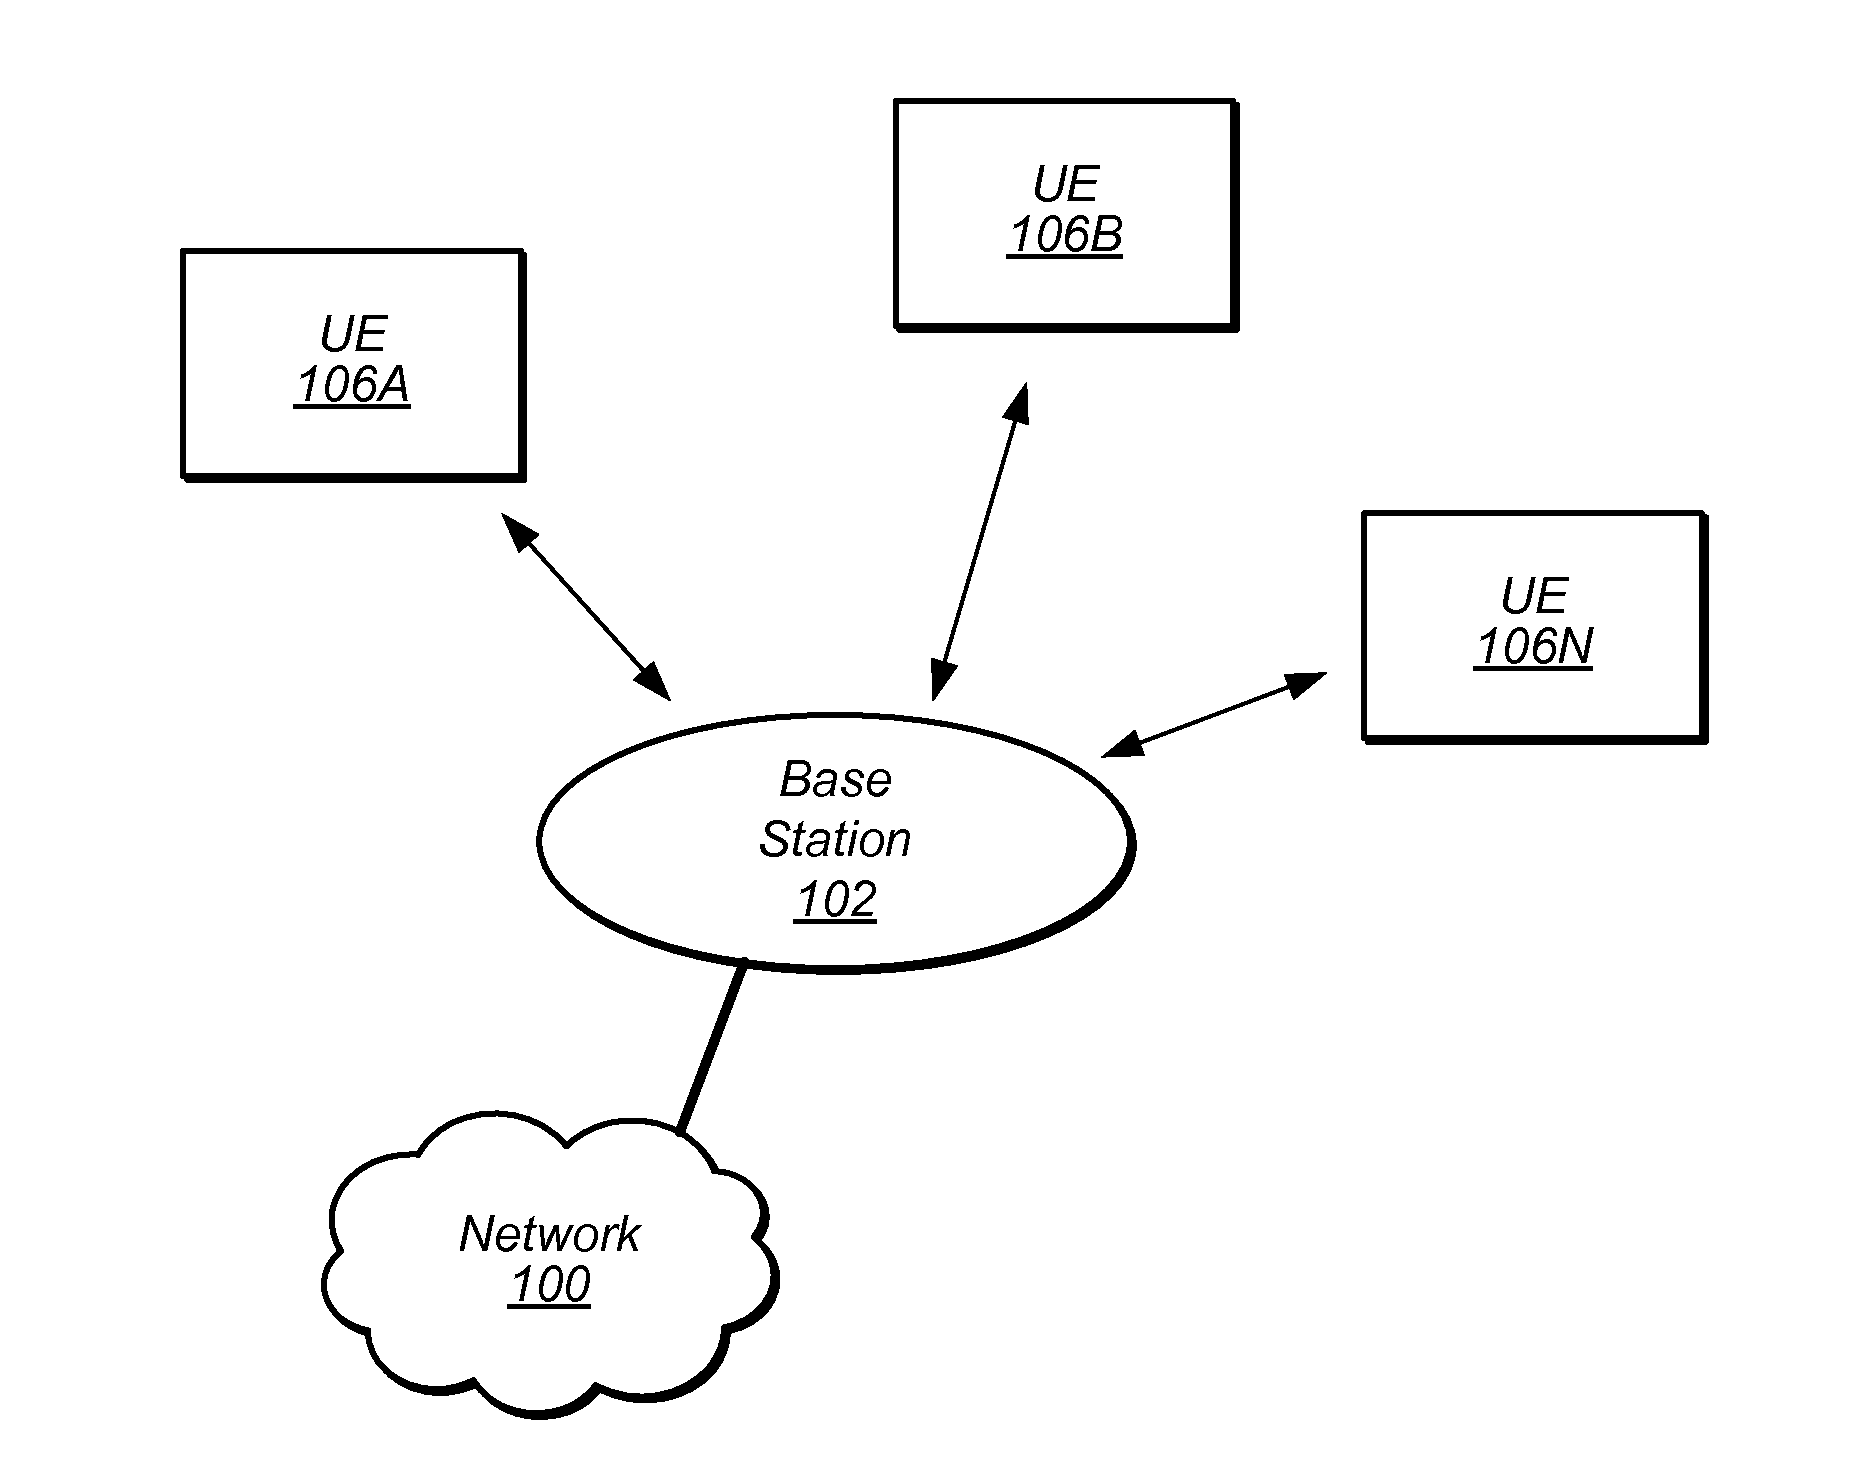 Automatically Modifying Wireless Network Connection Policies Based on User Activity Levels